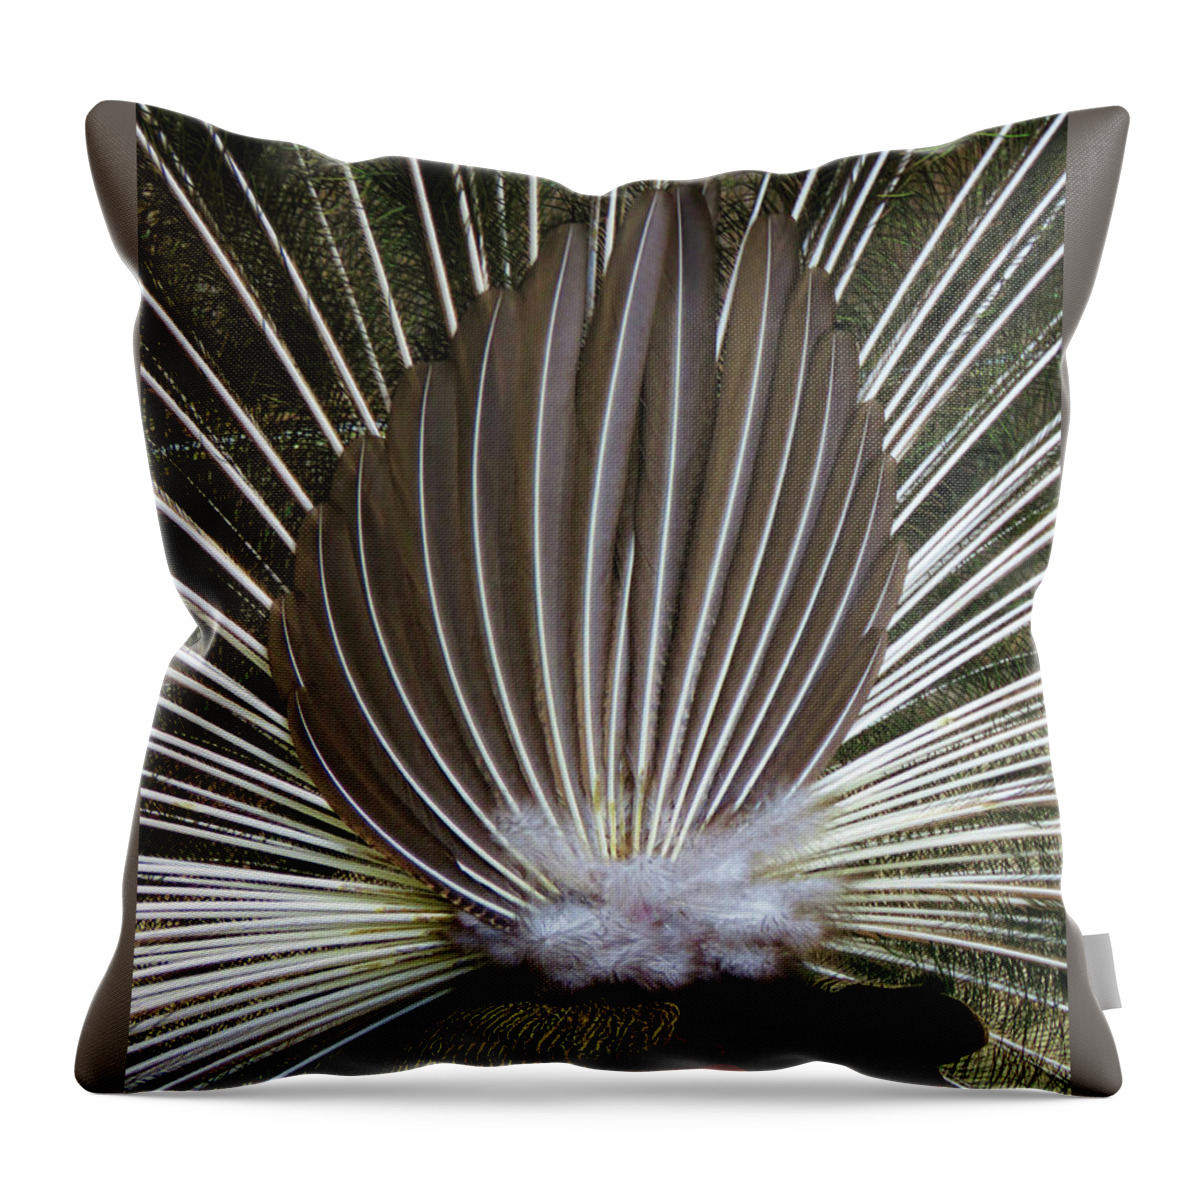 Peacock Throw Pillow featuring the photograph Peacock Back Fan by Helaine Cummins